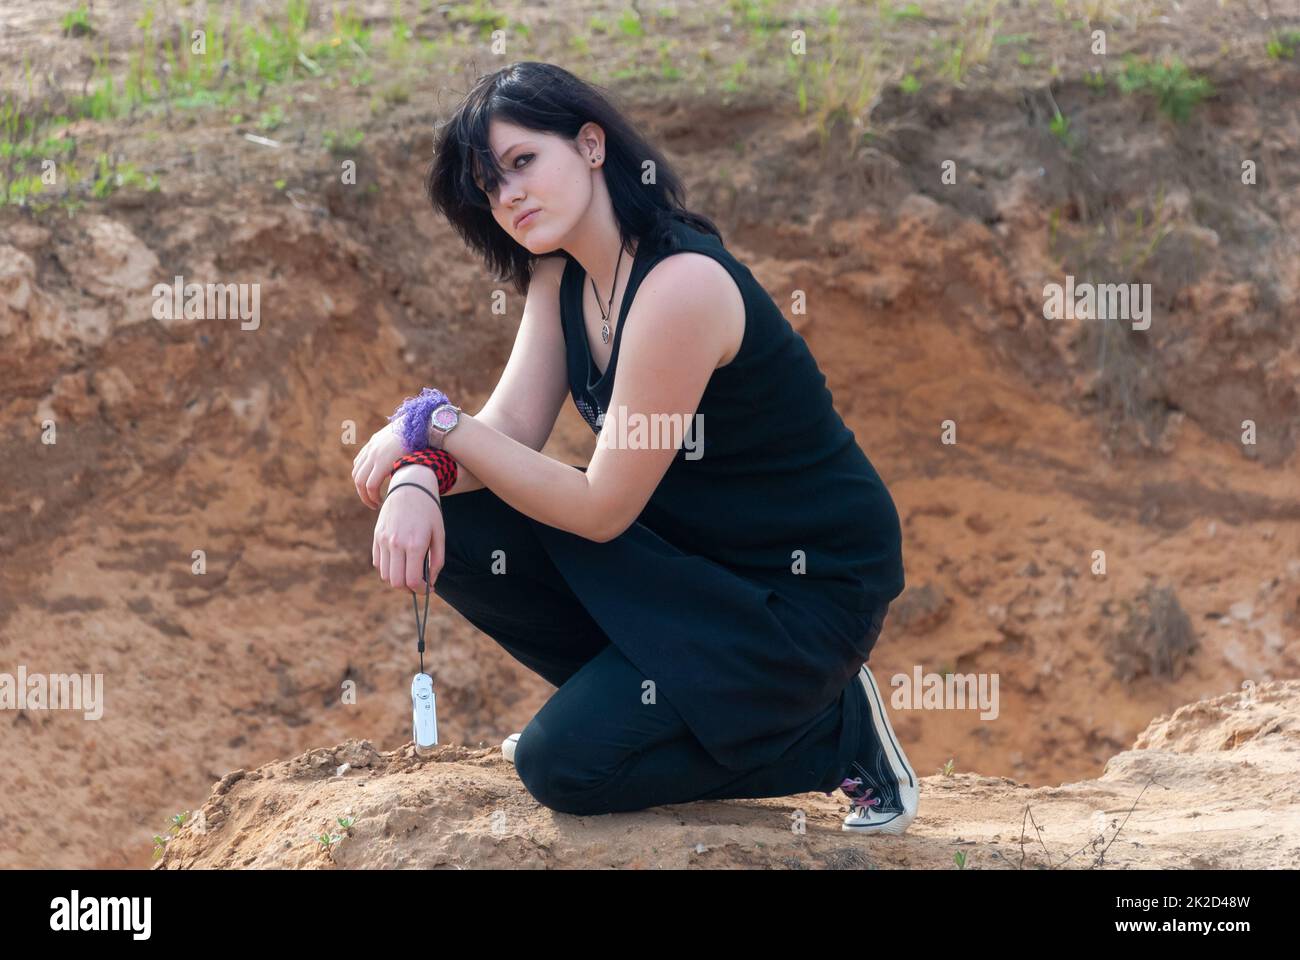 Punk emo girl, young adult with black hair, kneeling, looking at camera Stock Photo